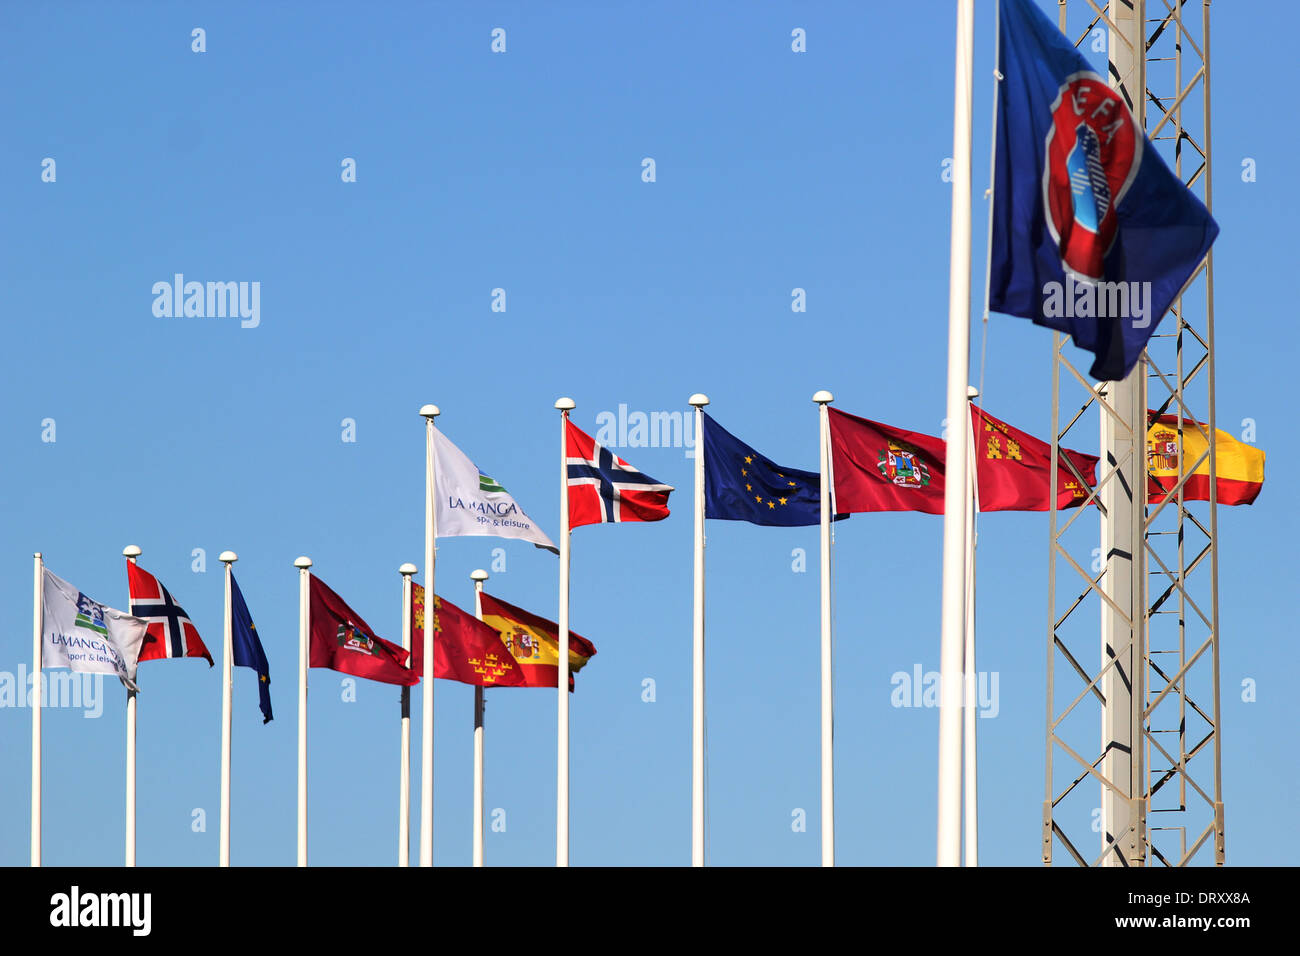 Flags of nations for football at La Manga Club Stock Photo